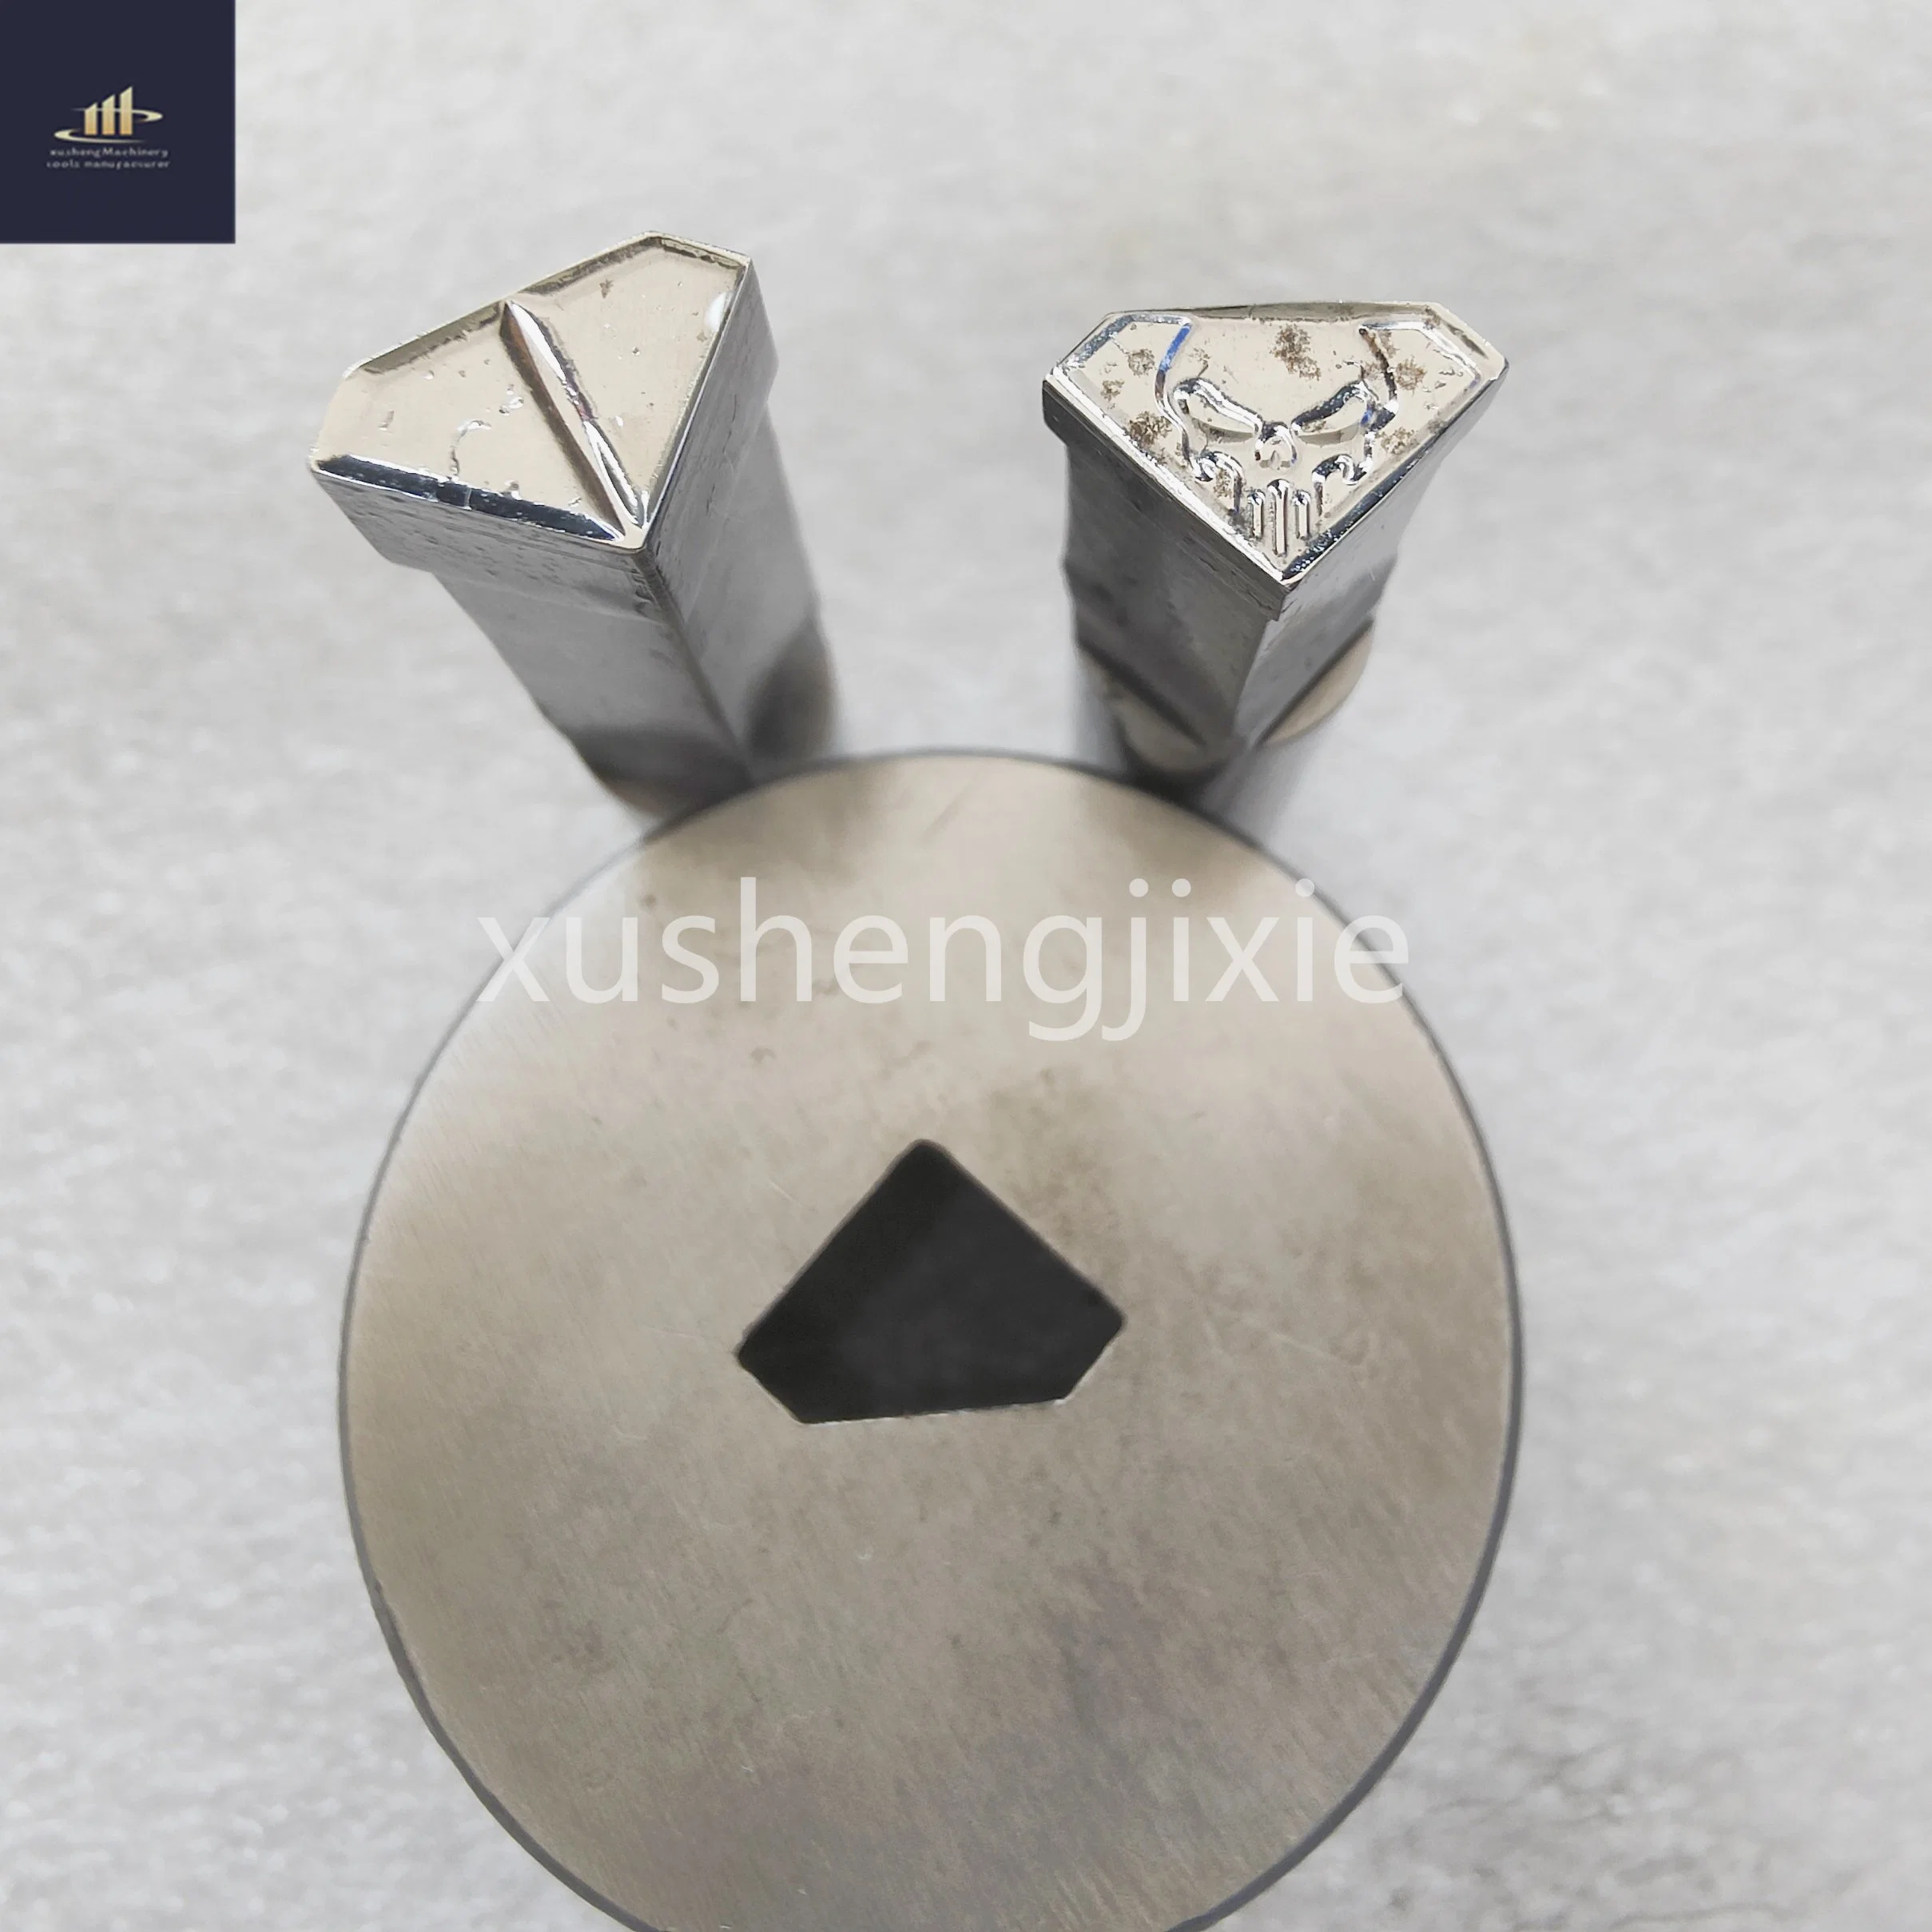 Punisher Logo Tdp Punch Pill Dies for Single Punch Tablet Press Machine